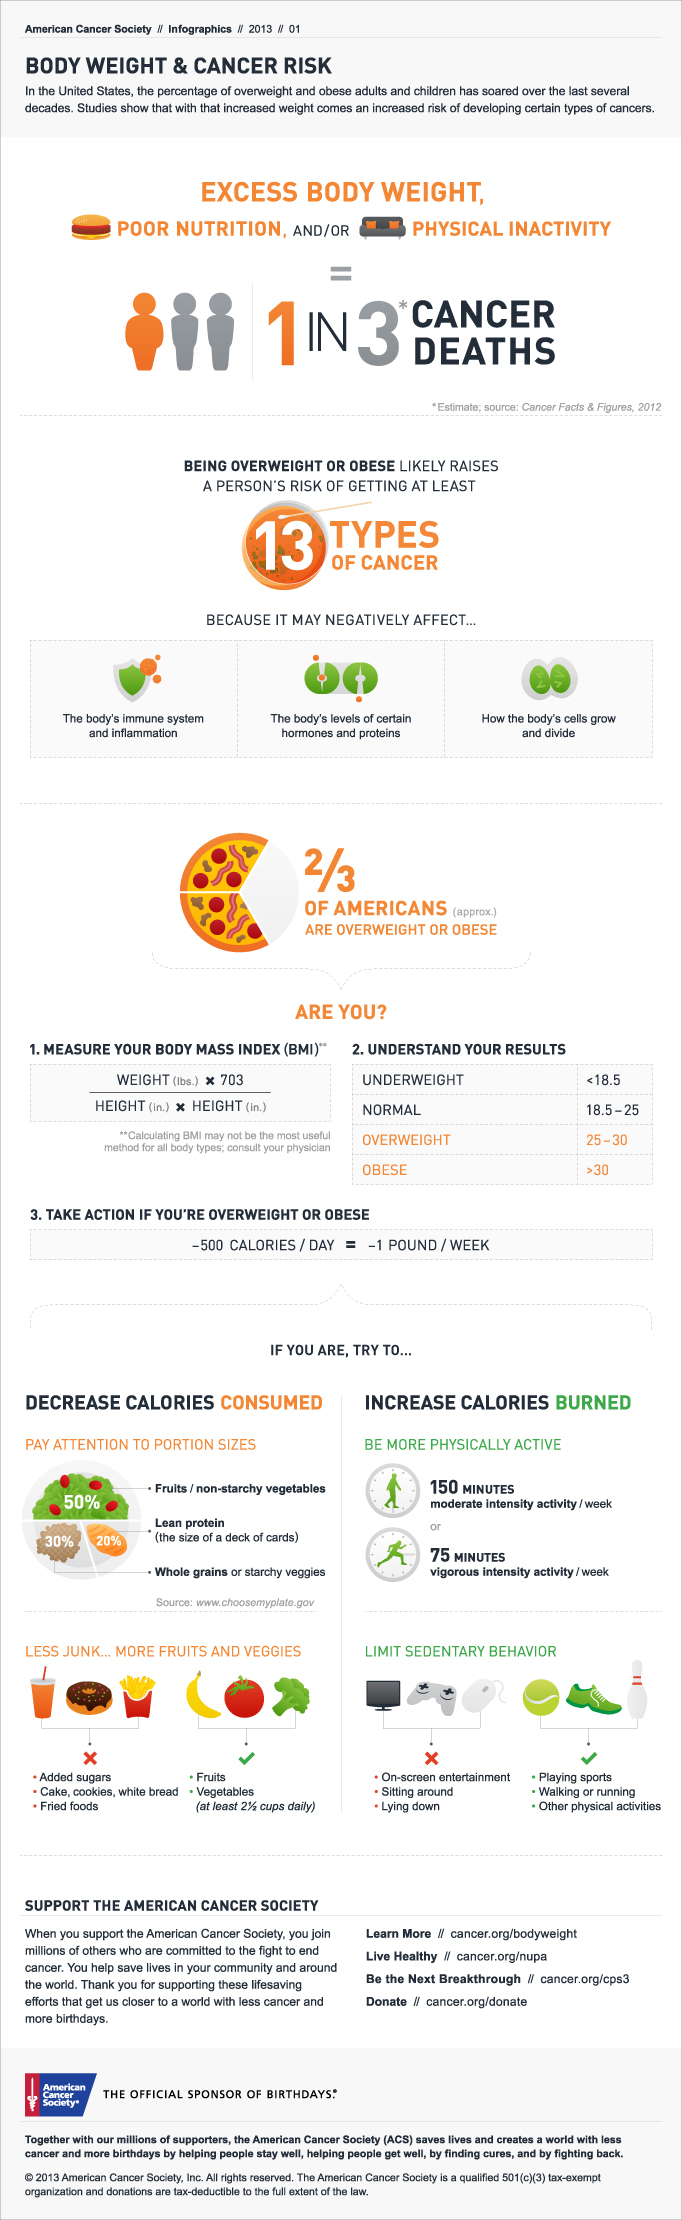 Body Weight and Cancer Risk Infographic - full